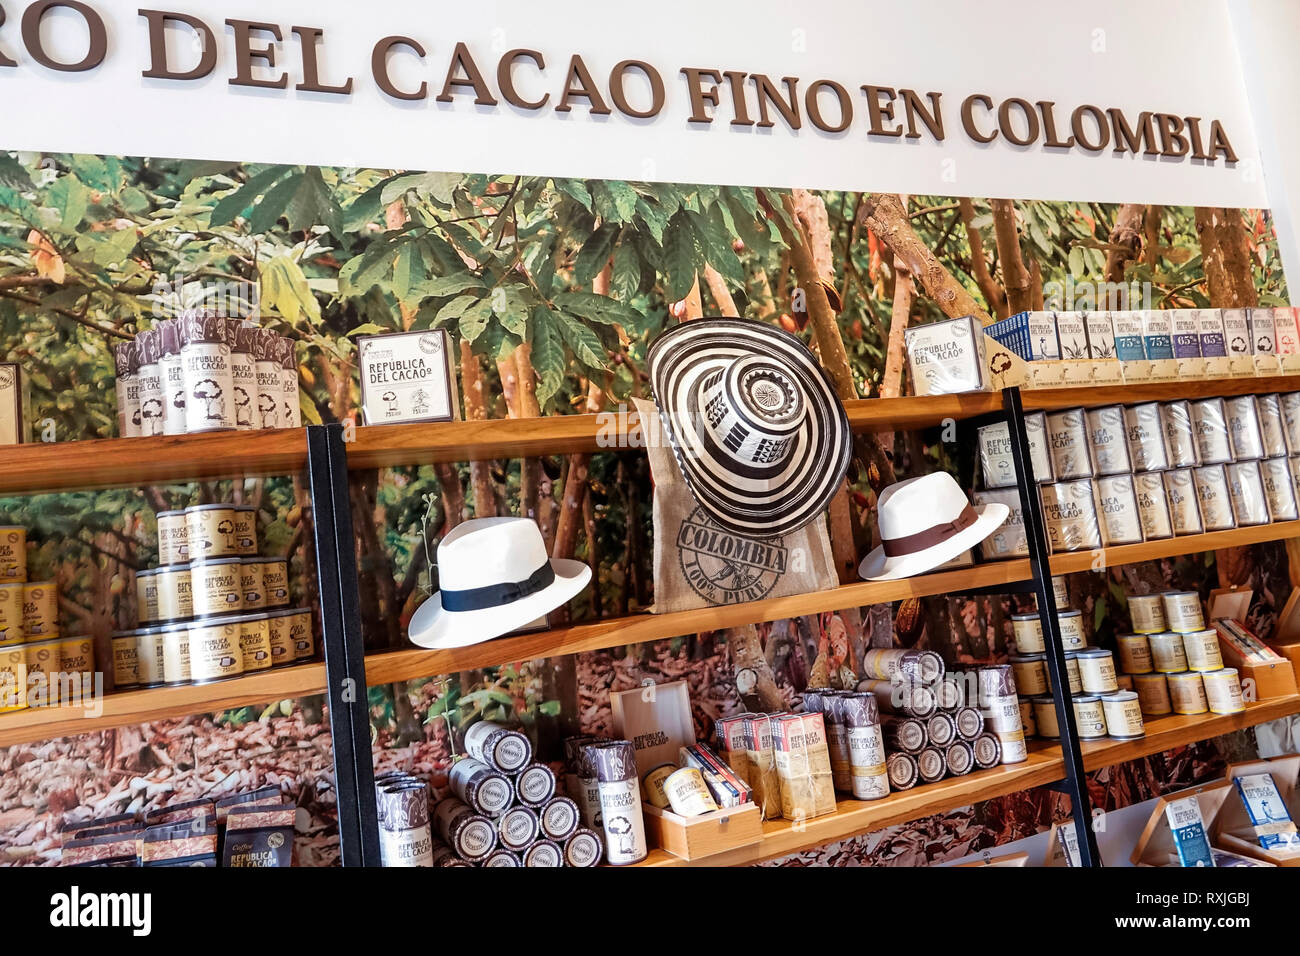 Cartagena Colombia,Republica del Cacao,store,shopping shopper shoppers shop shops market markets marketplace buying selling,retail store stores busine Stock Photo